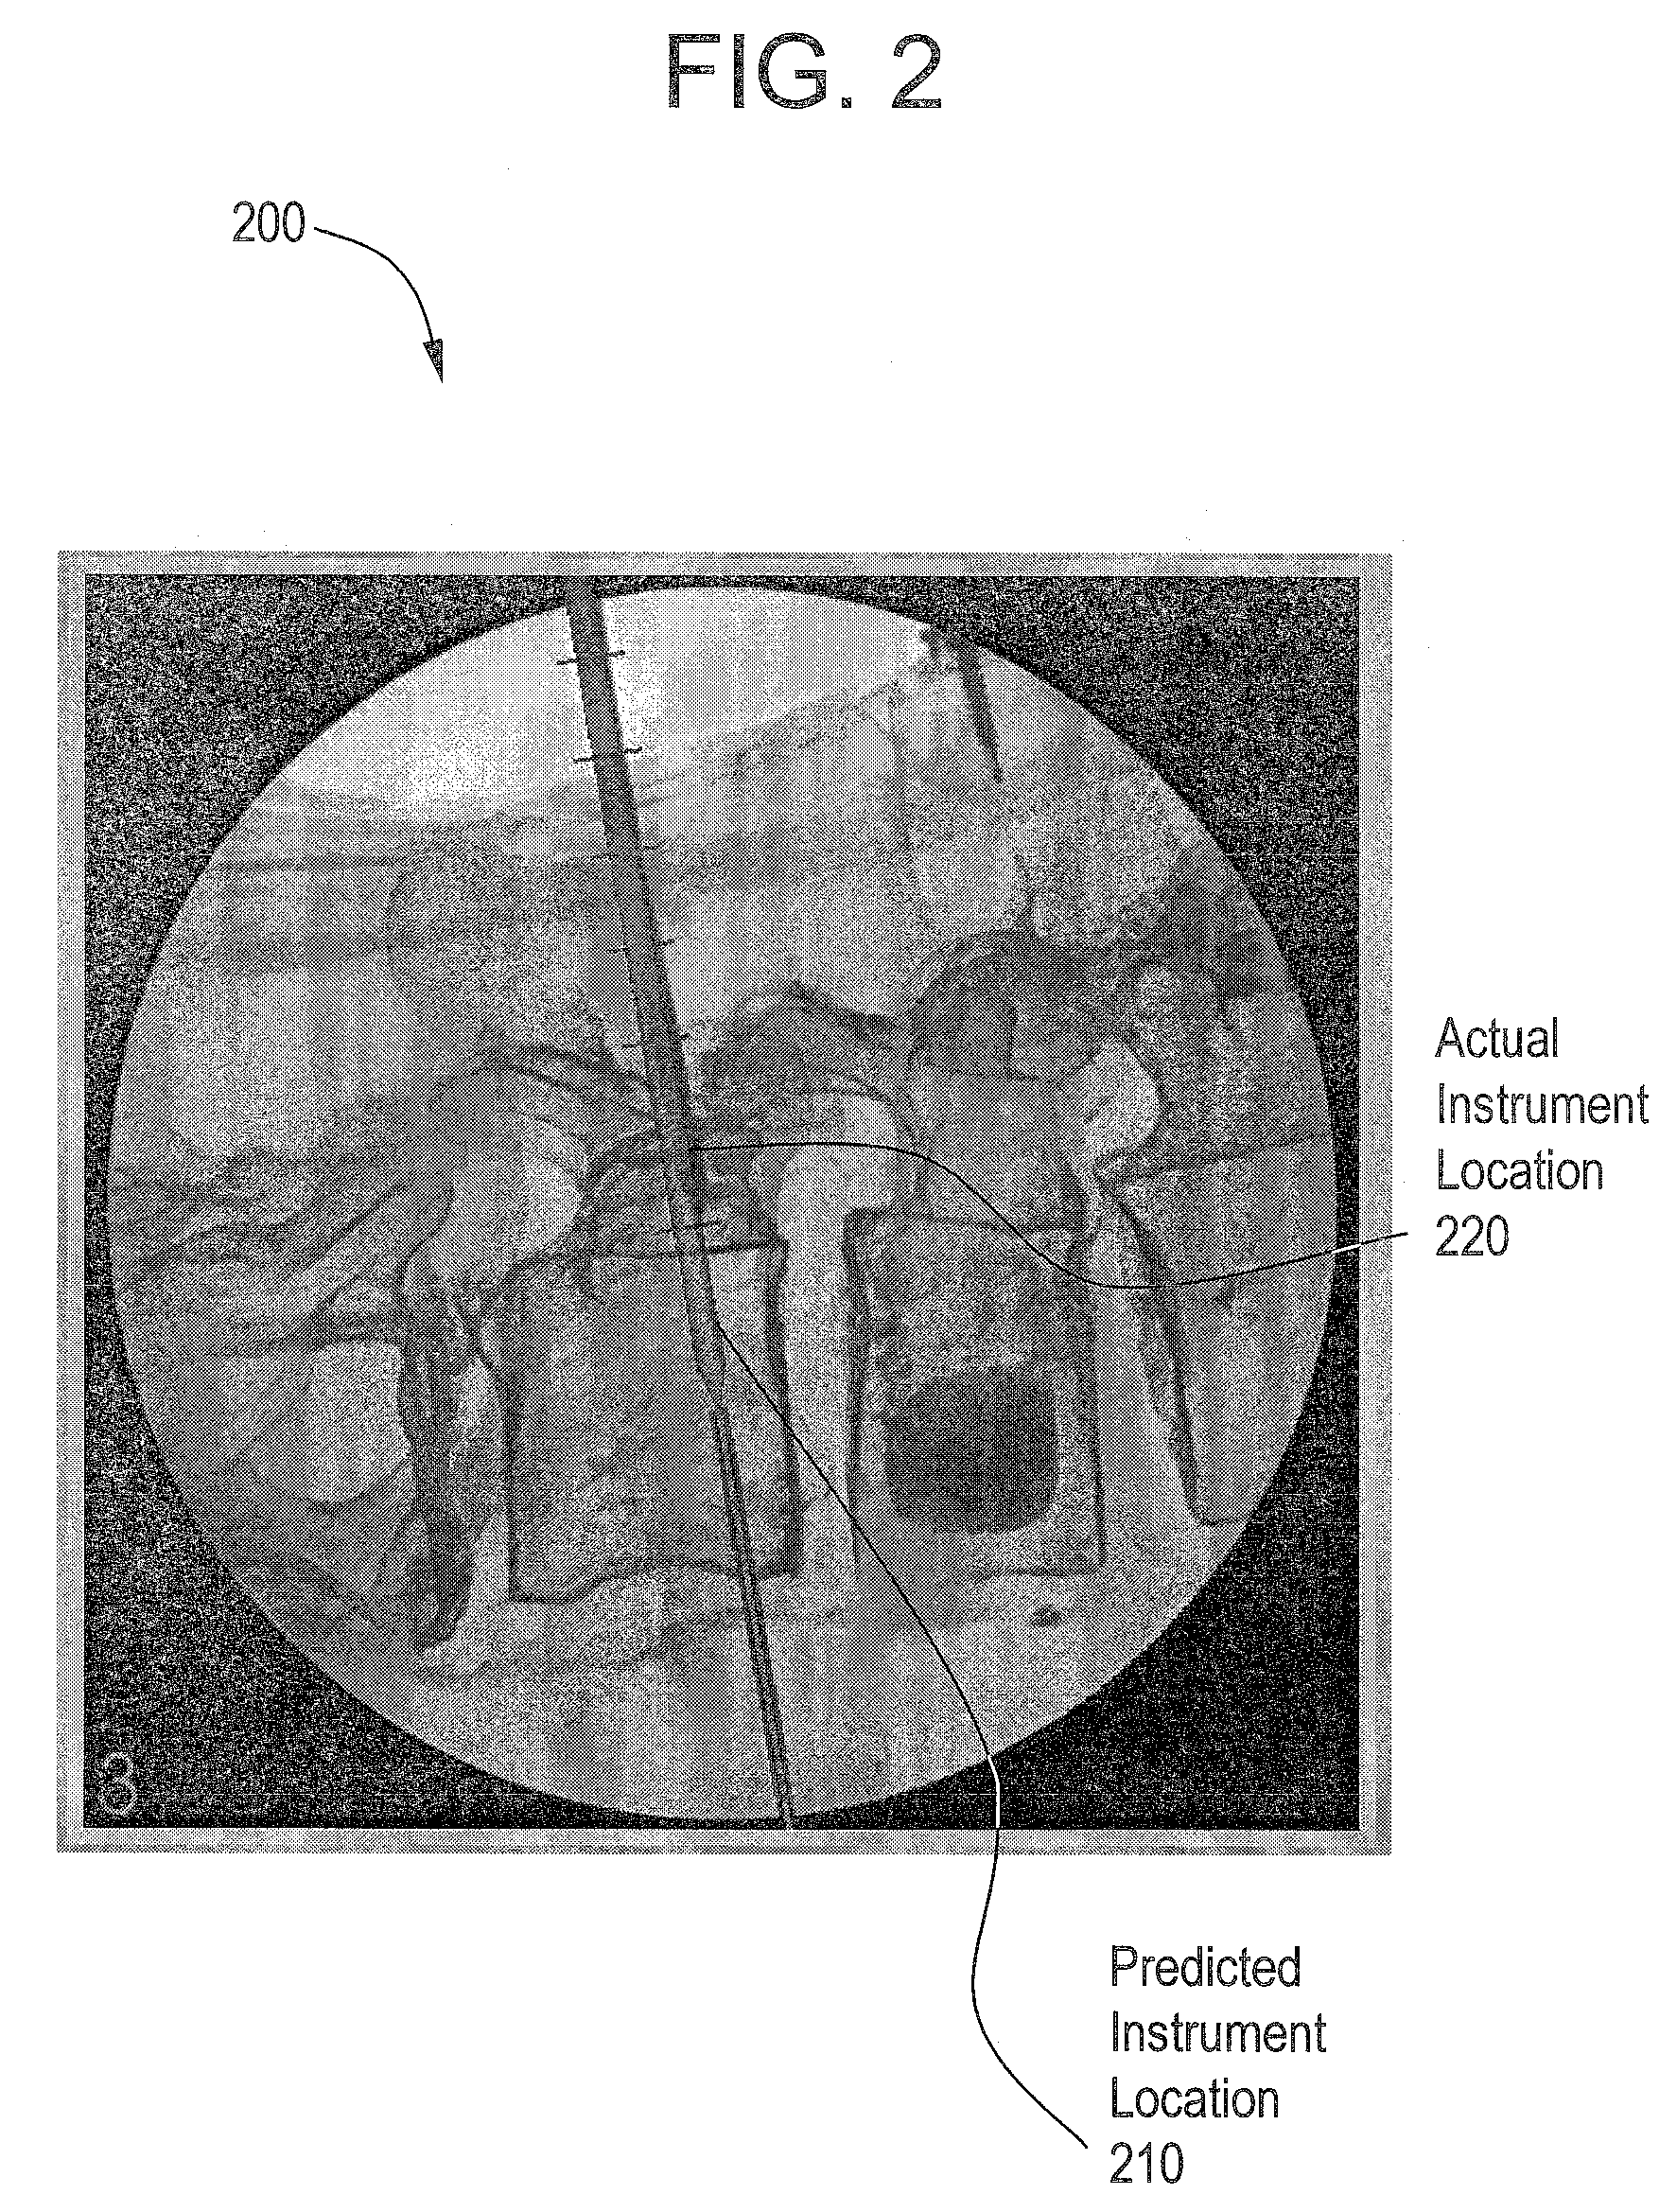 System and method for accuracy verification for image based surgical navigation